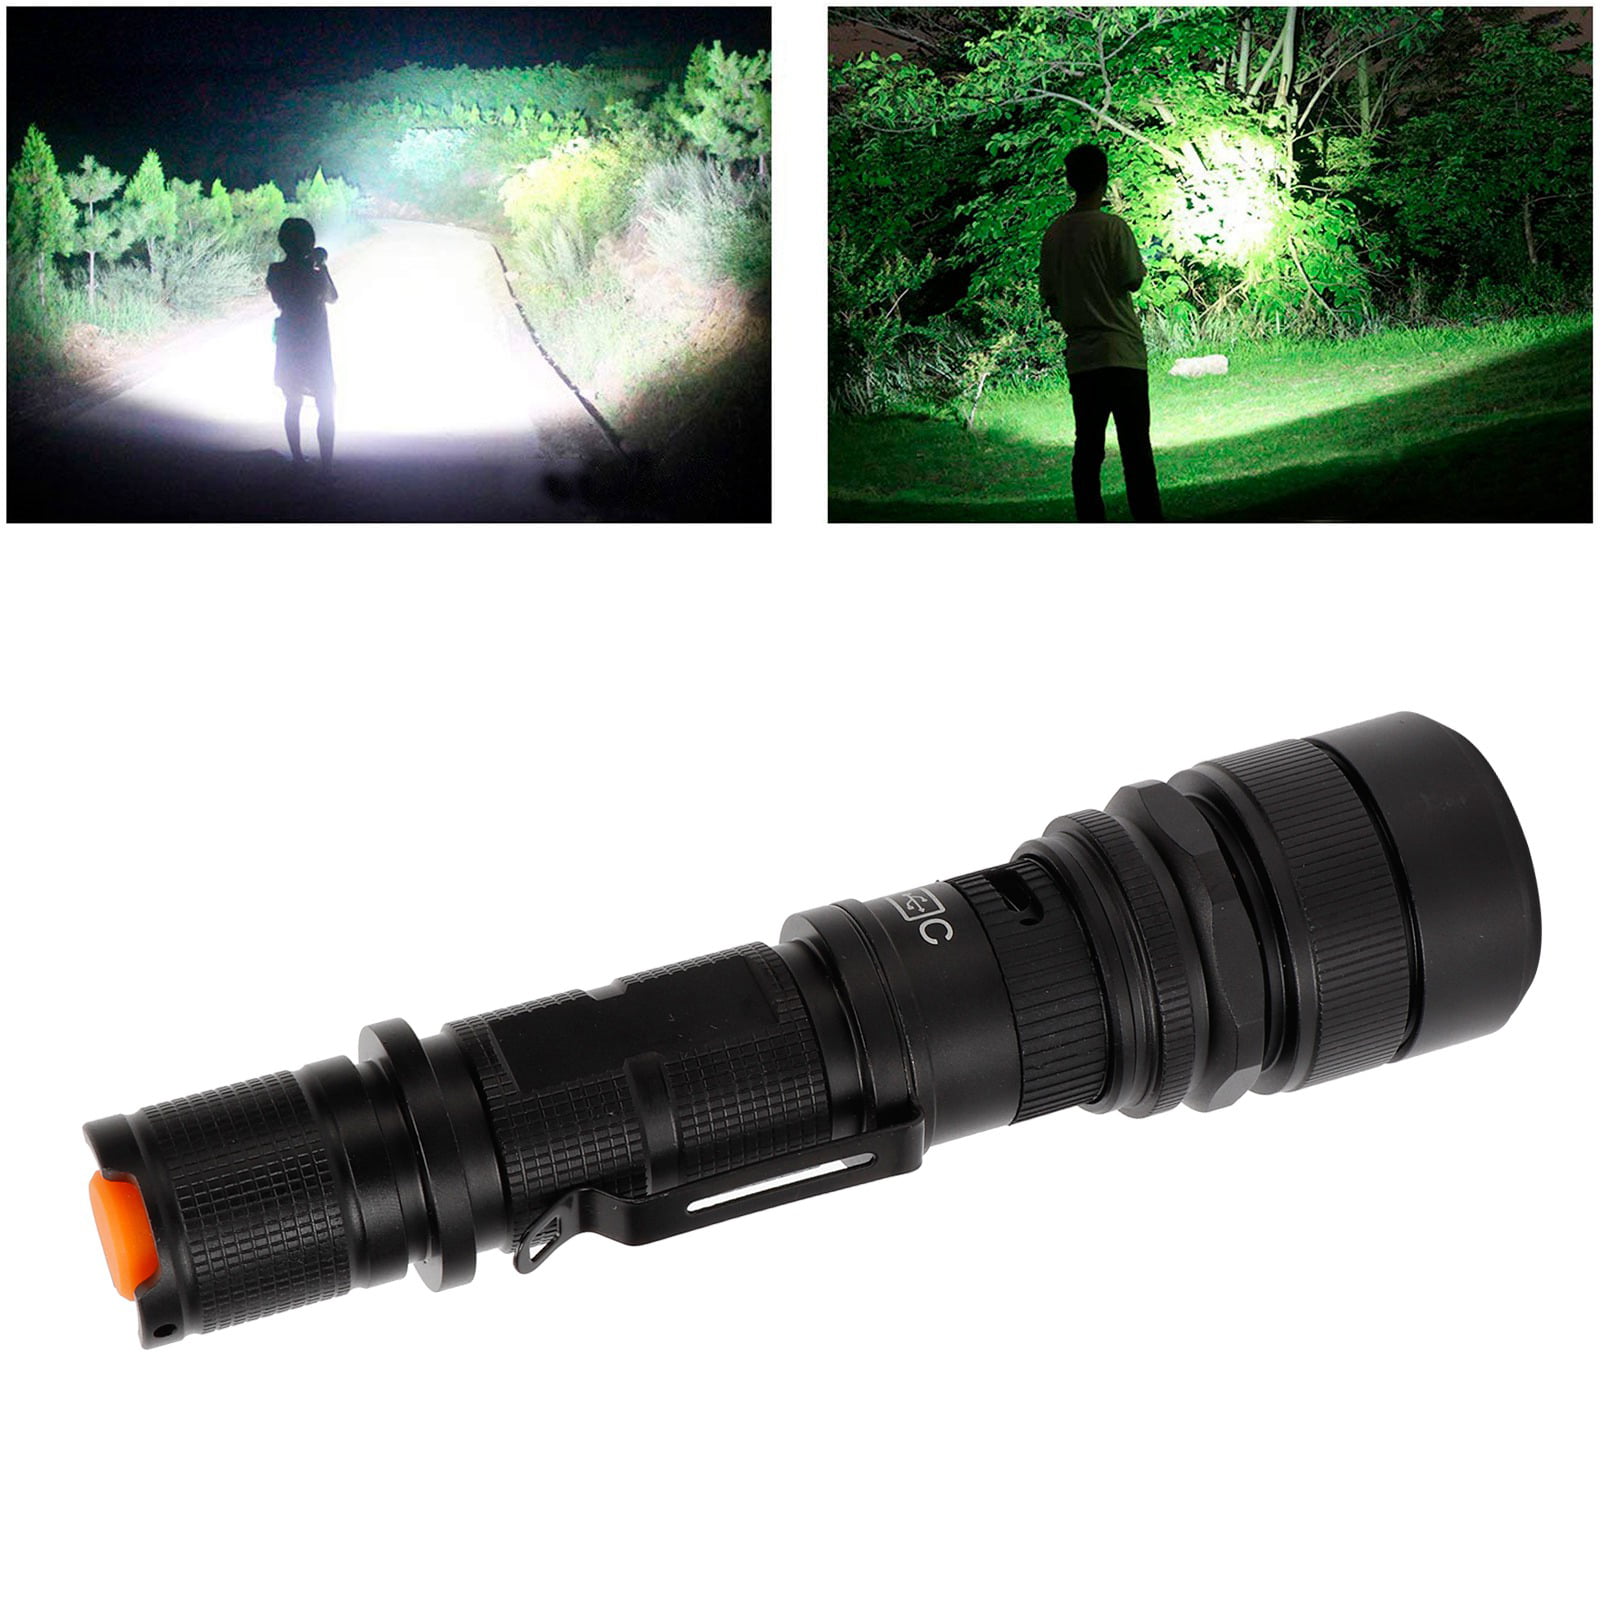 RGBW 4 Color In 1 LED Flashlight Telescopic Zoomable Torch Waterproof Outdoor RH 